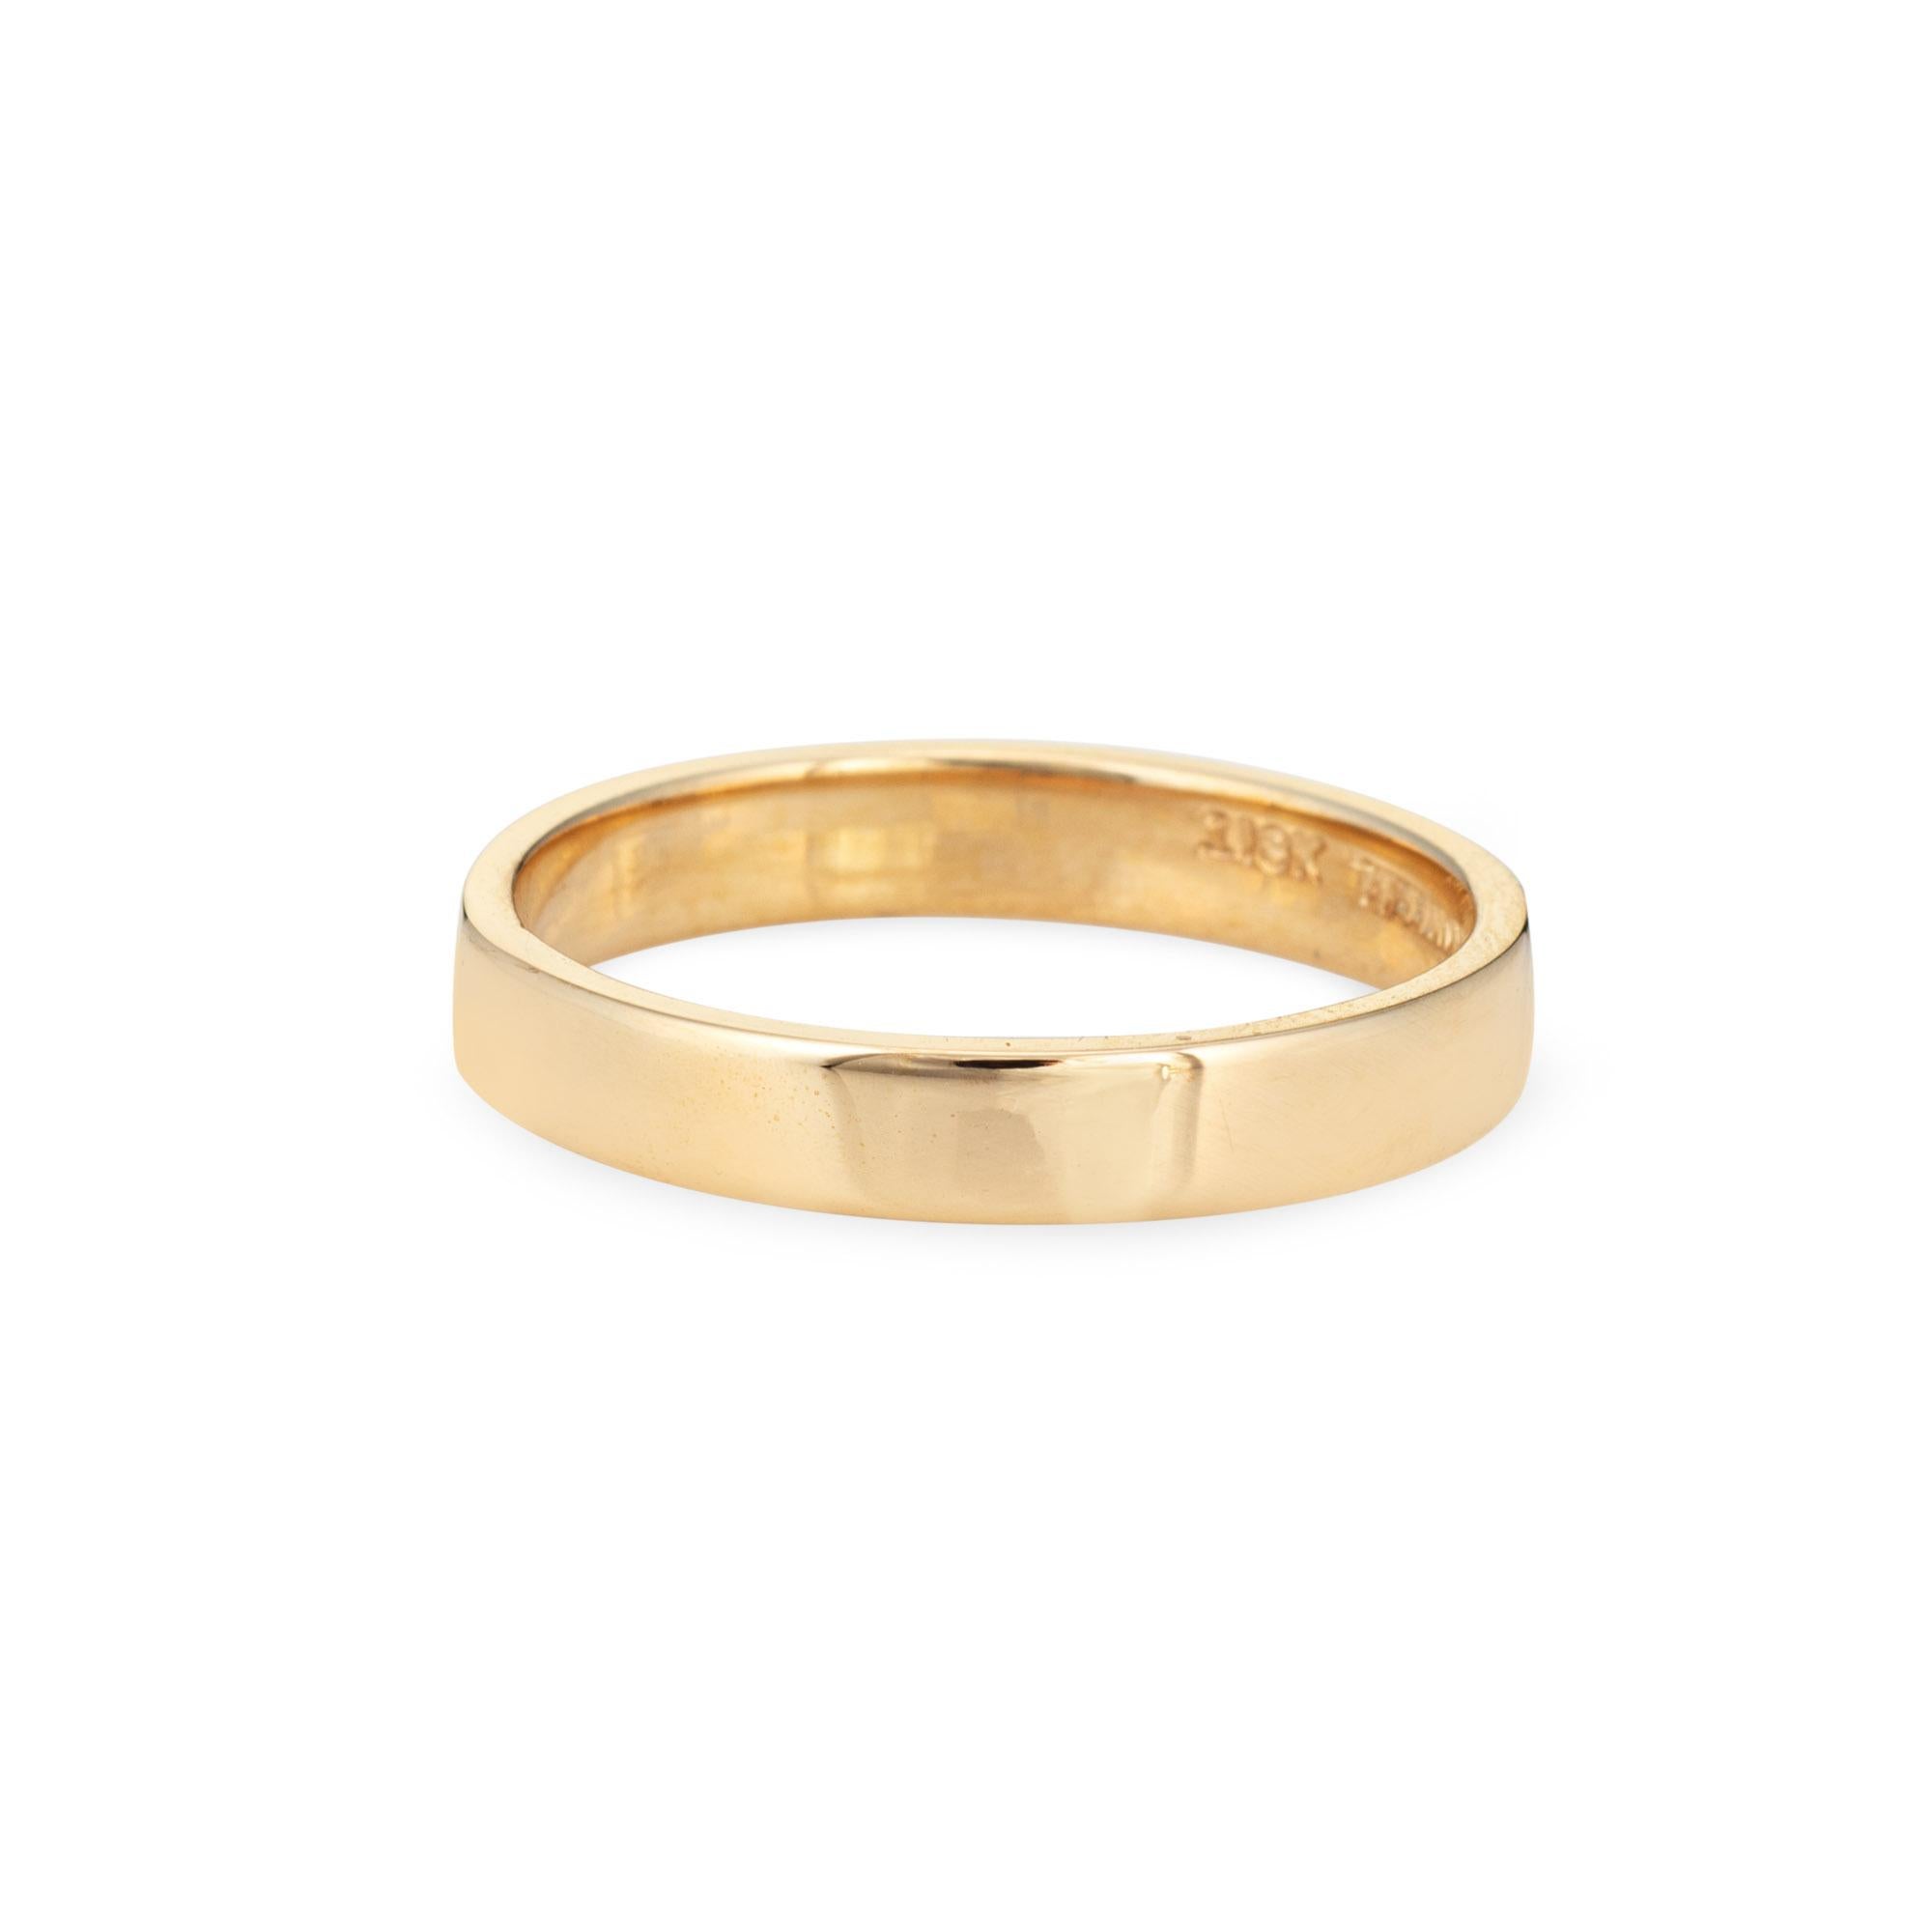 Vintage Tiffany & Co wedding band crafted in 18 karat yellow gold (circa 1950s to 1960s).  

The simple and elegant band has a flat design and high polished finished, measuring 4mm wide. It is ideal worn alone or stacked. 

The ring is in very good